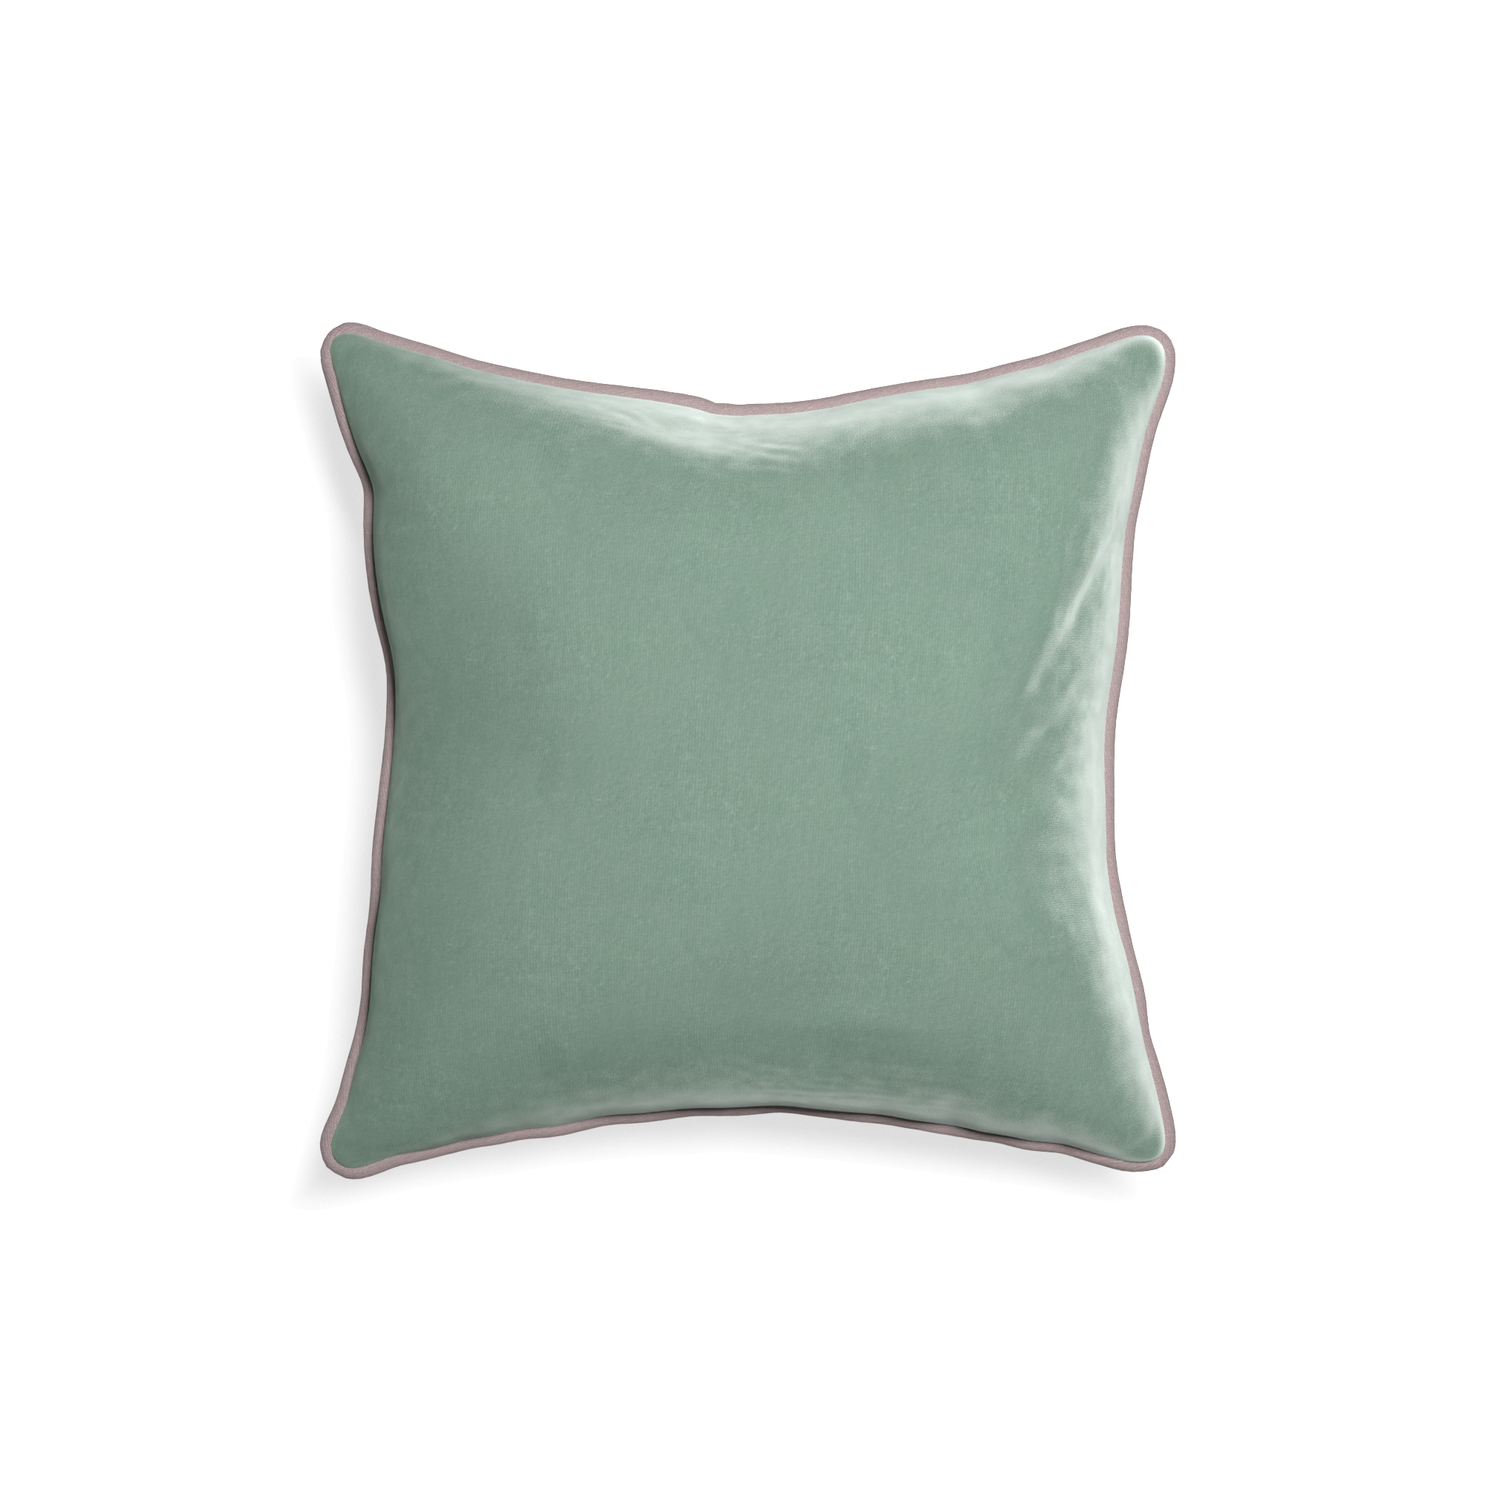 18-square sea salt velvet custom blue greenpillow with orchid piping on white background